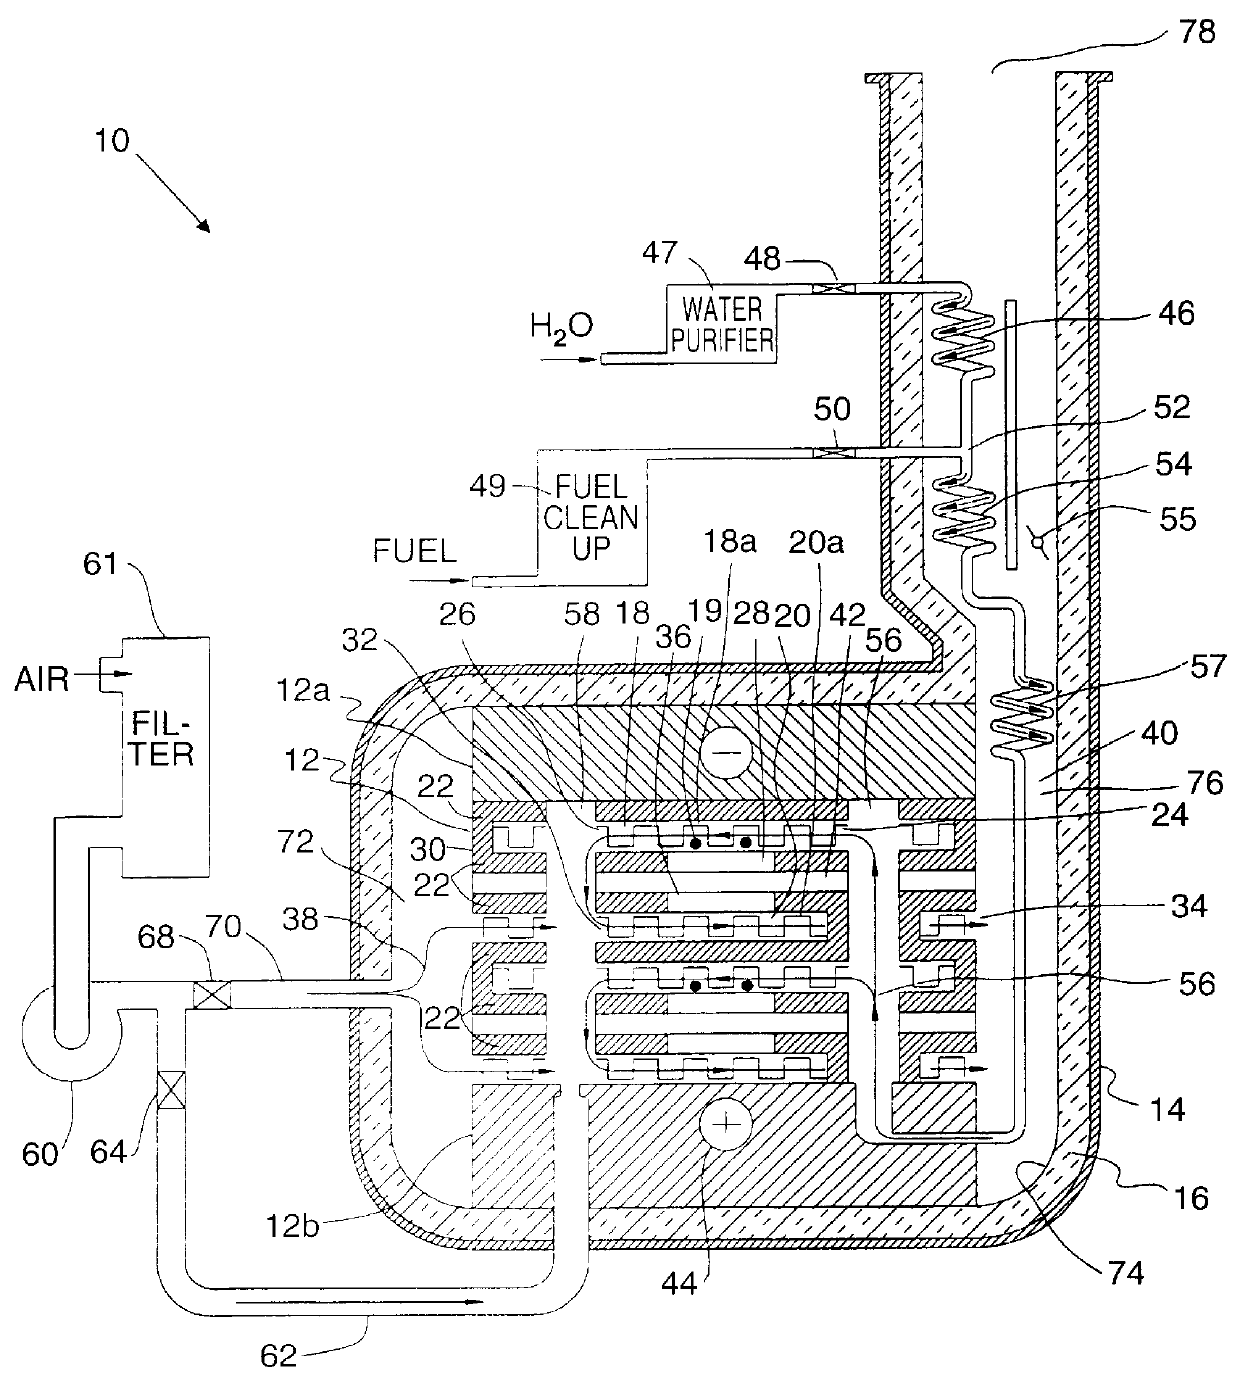 Fuel cell with internal combustion chamber